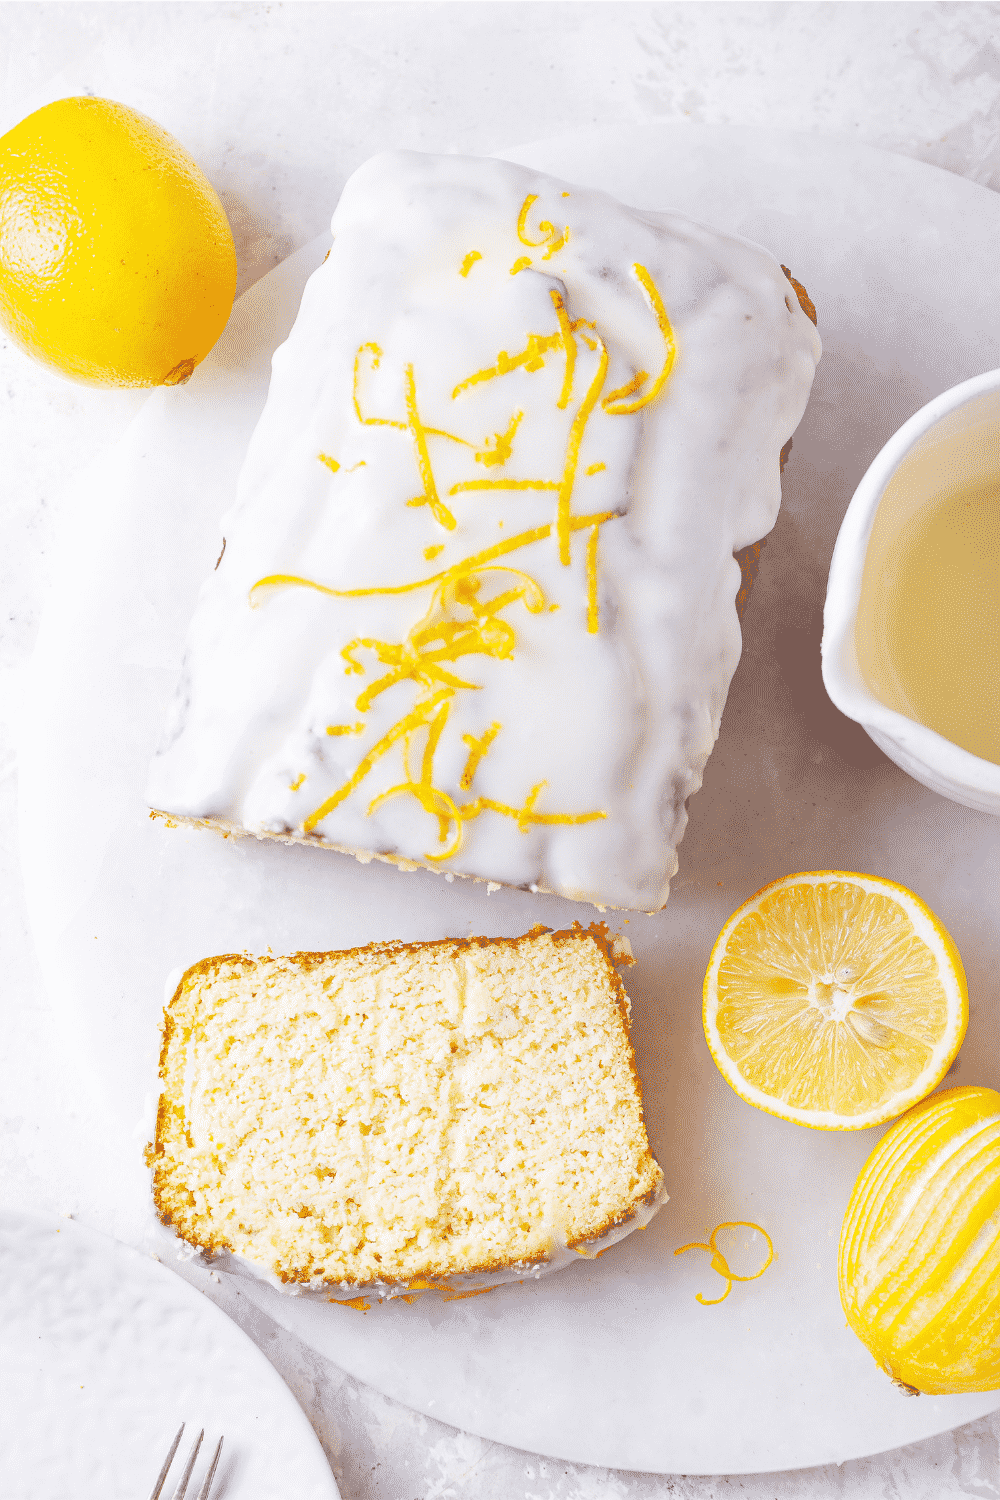 An overhead view of a loaf of keto lemon pound cake. The top of the keto cake is covered in a white keto glaze and lemon zest is on top of the glaze. A slice of keto lemon cake is in front loaf and it is flat on the white saucer. There is a sliced lemon and a whole lemon to the right of the piece of cake. A whole lemon is to the back left of the loaf.